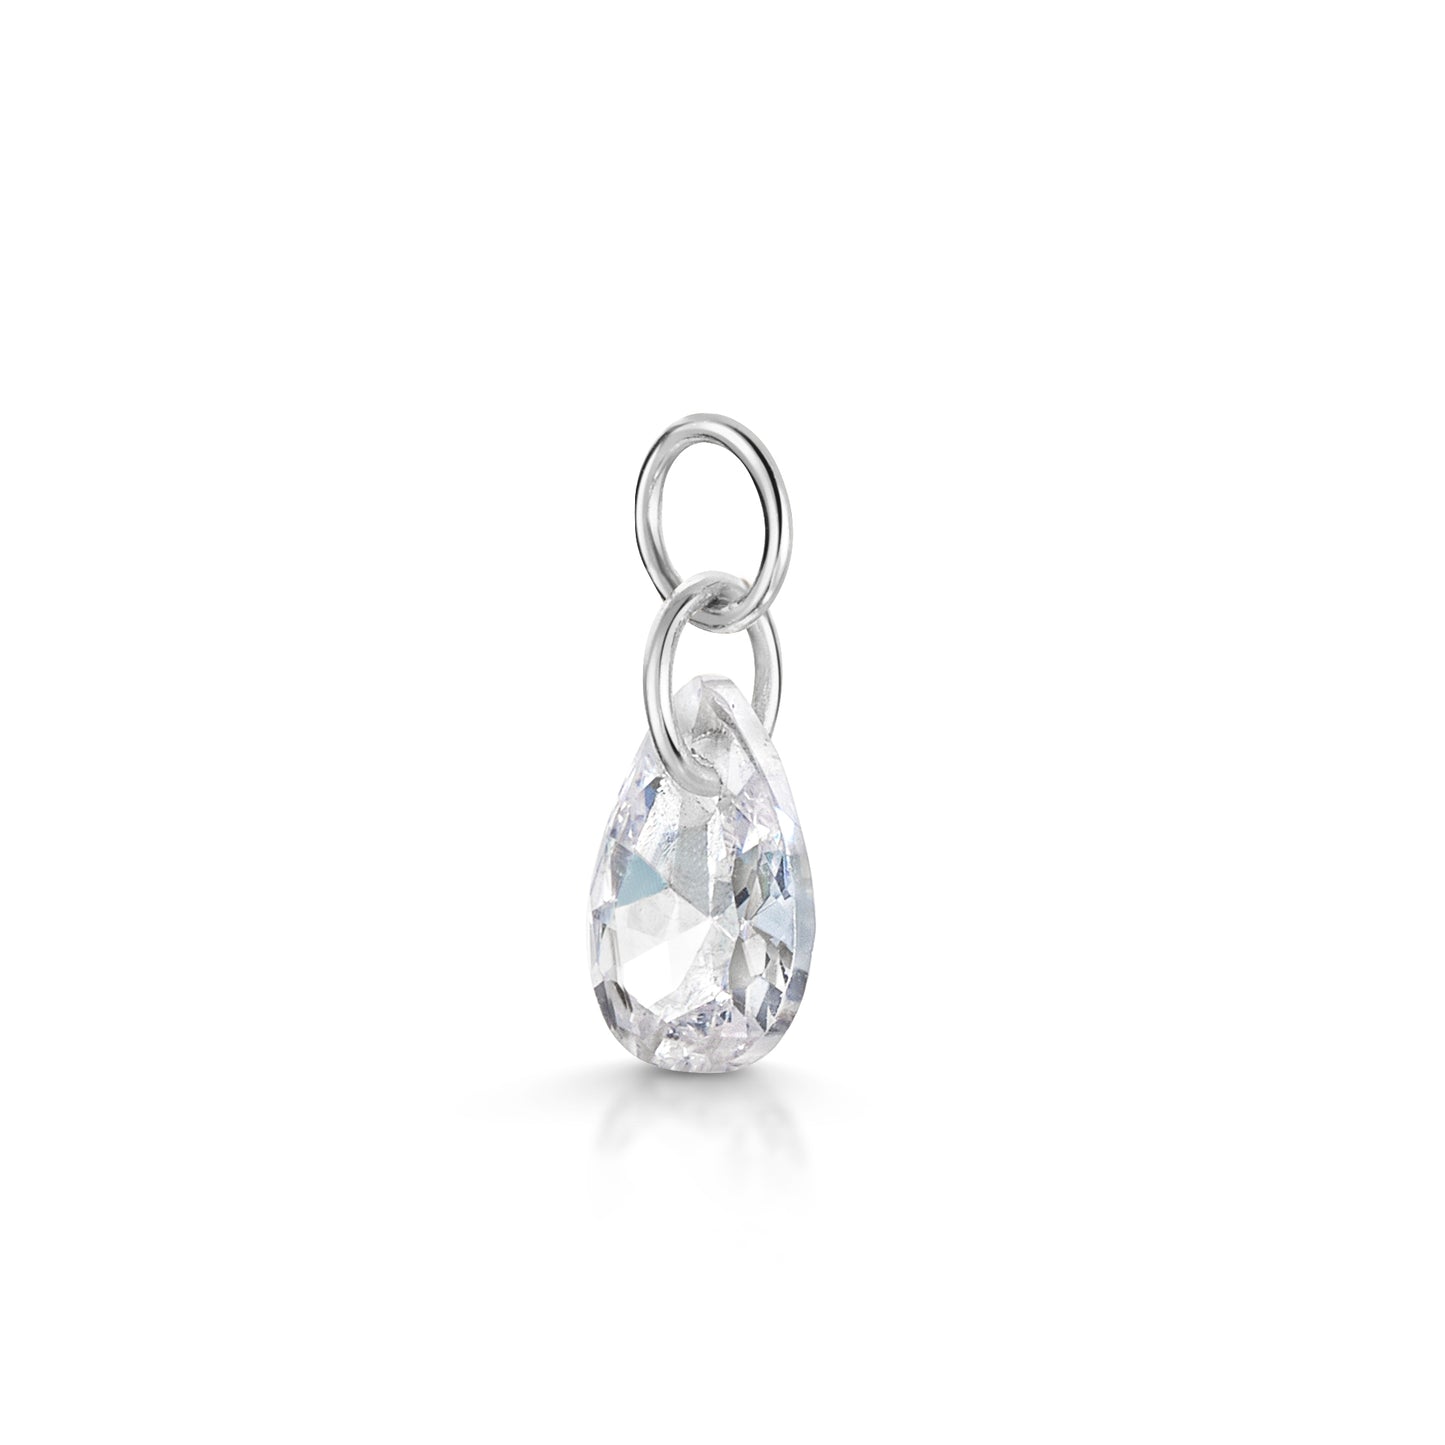 9k solid white gold floating tear drop crystal charm - Laura Bond Jewellery